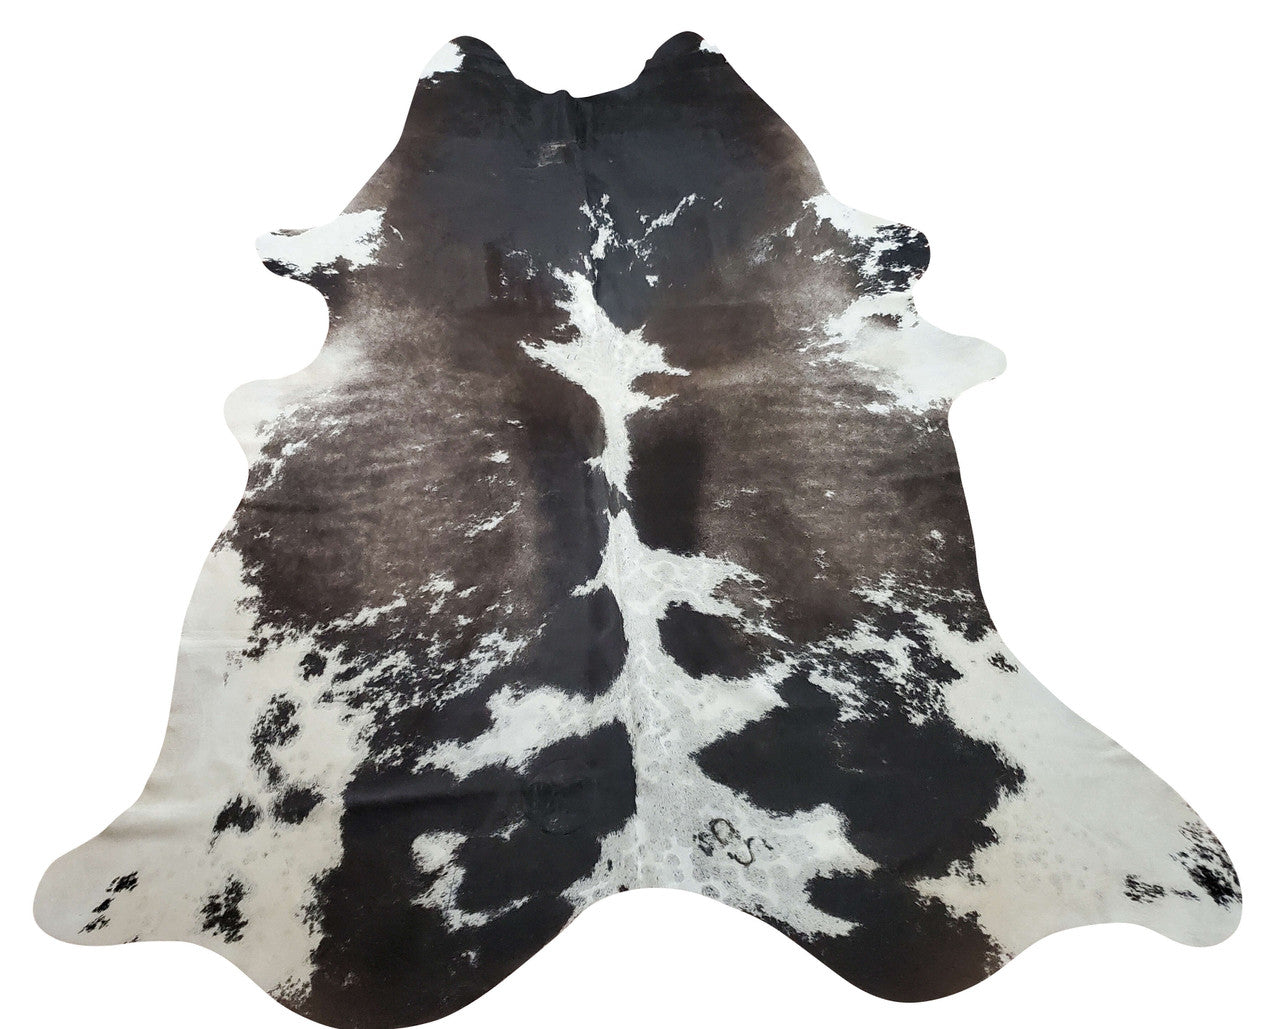 Large Brazilian cowhide rugs online in amazing discounted prices for your home. Nothing feels better than a gray-white cowhide rug in a modern home, and looks welcoming so you might opt to sit on them.
